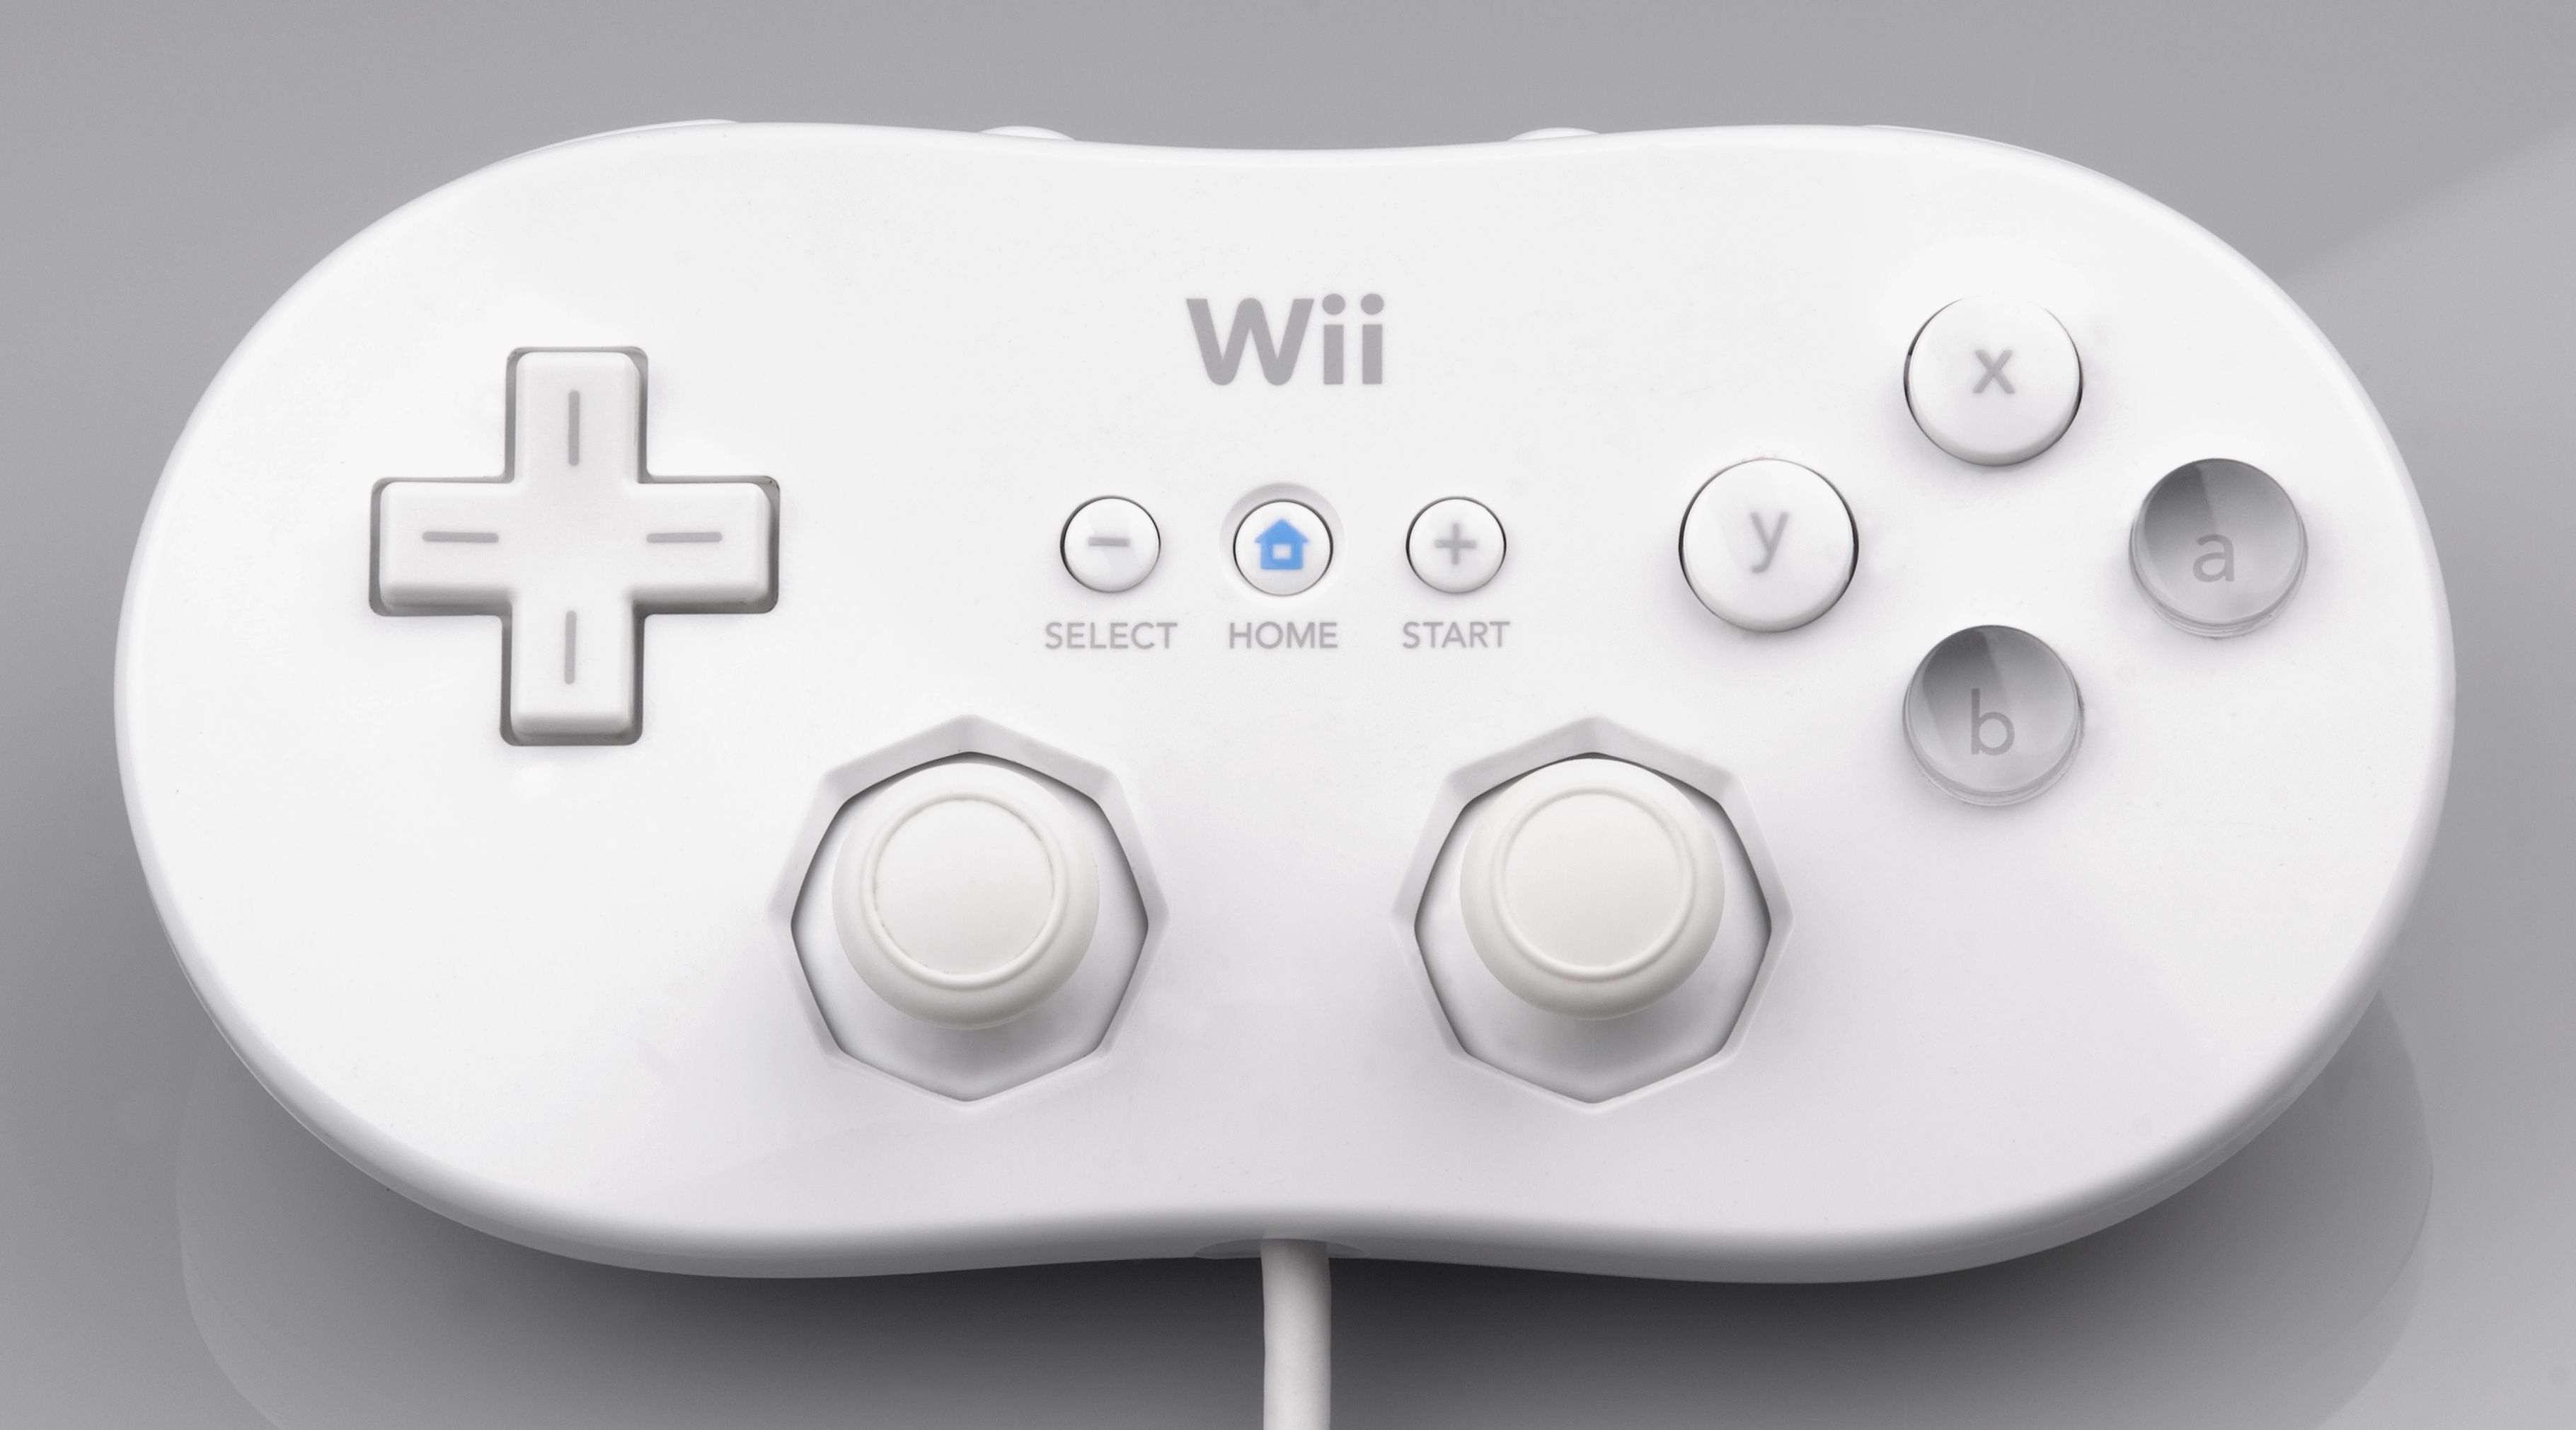 wii games compatible with wii u